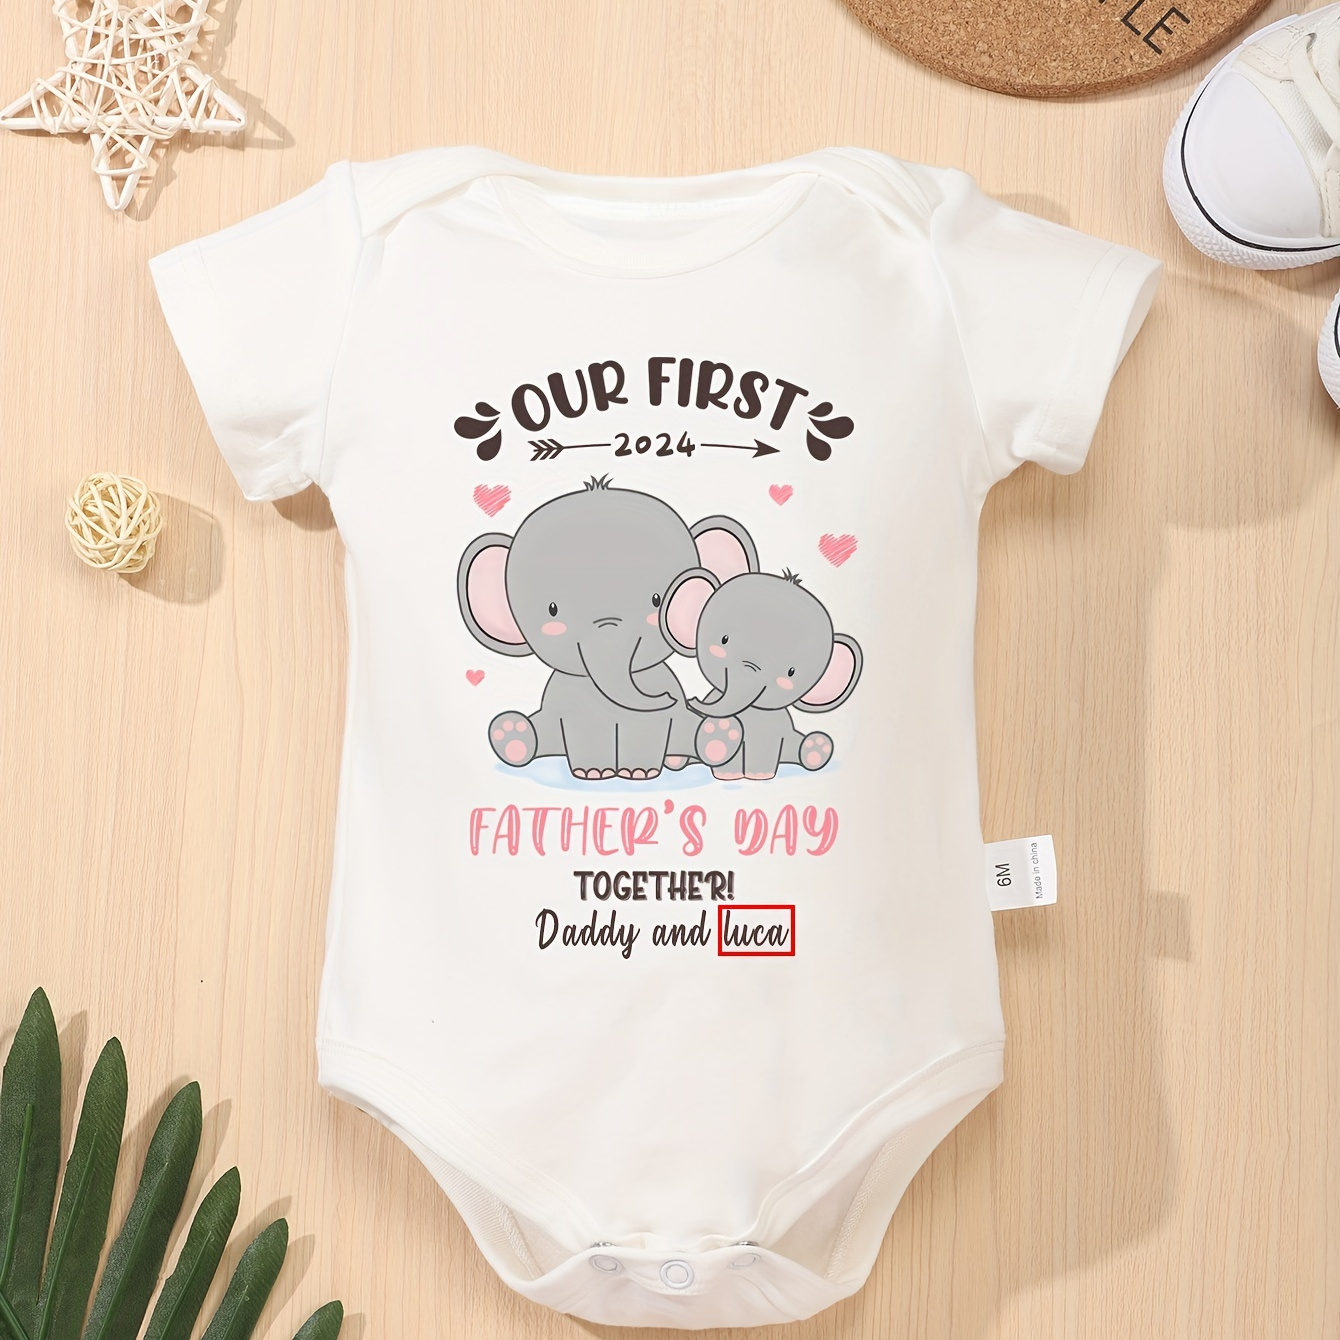 

Our 1st Father's Day Together & Customized Name & Cartoon Elephants Print Baby Boys & Girls Personalized Cotton Bodysuit Onesie, Cozy Short Sleeve Jumpsuit Romper Top Newborn Gifts